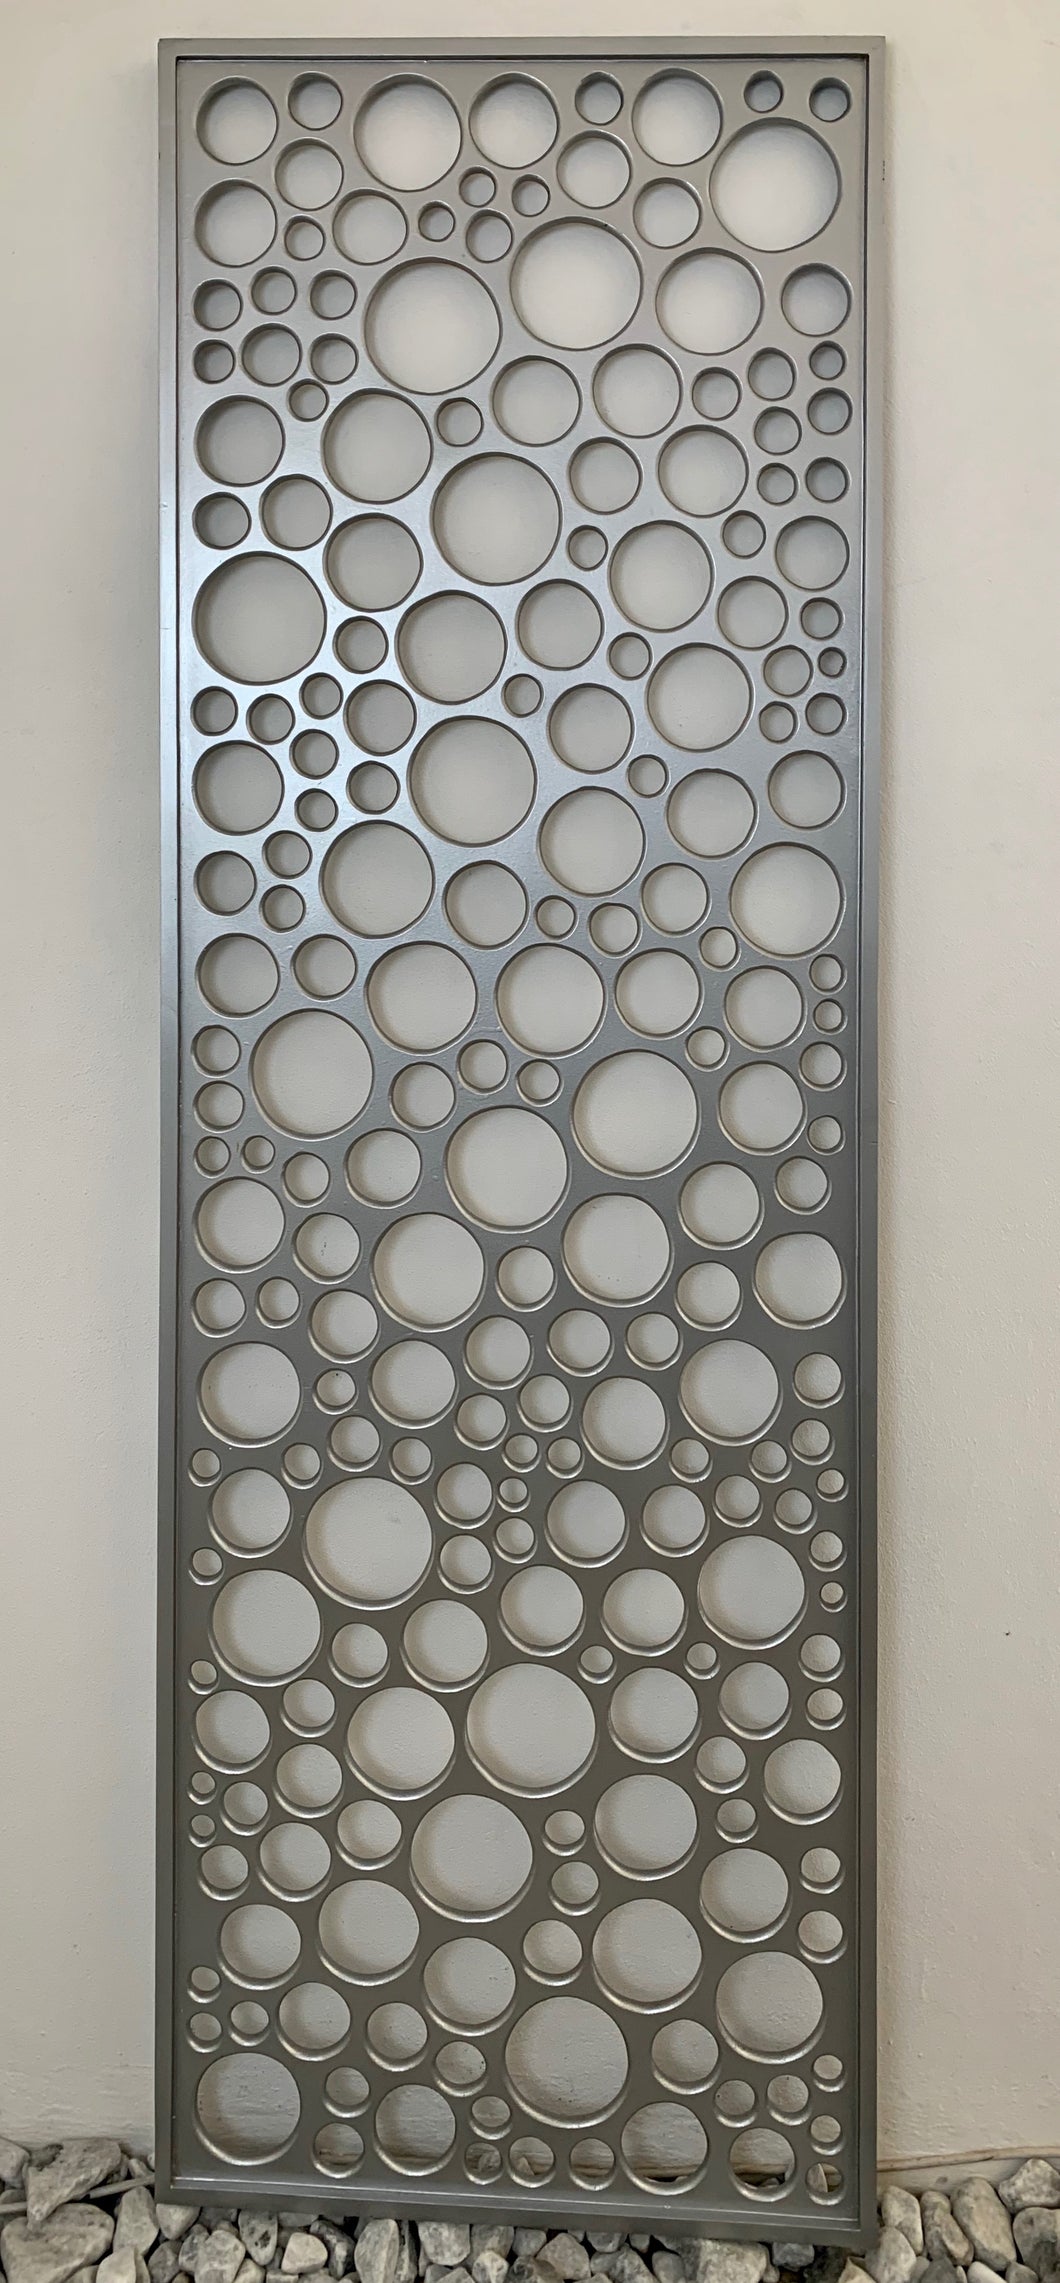 SILVER WALL PANEL WITH BUBBLES